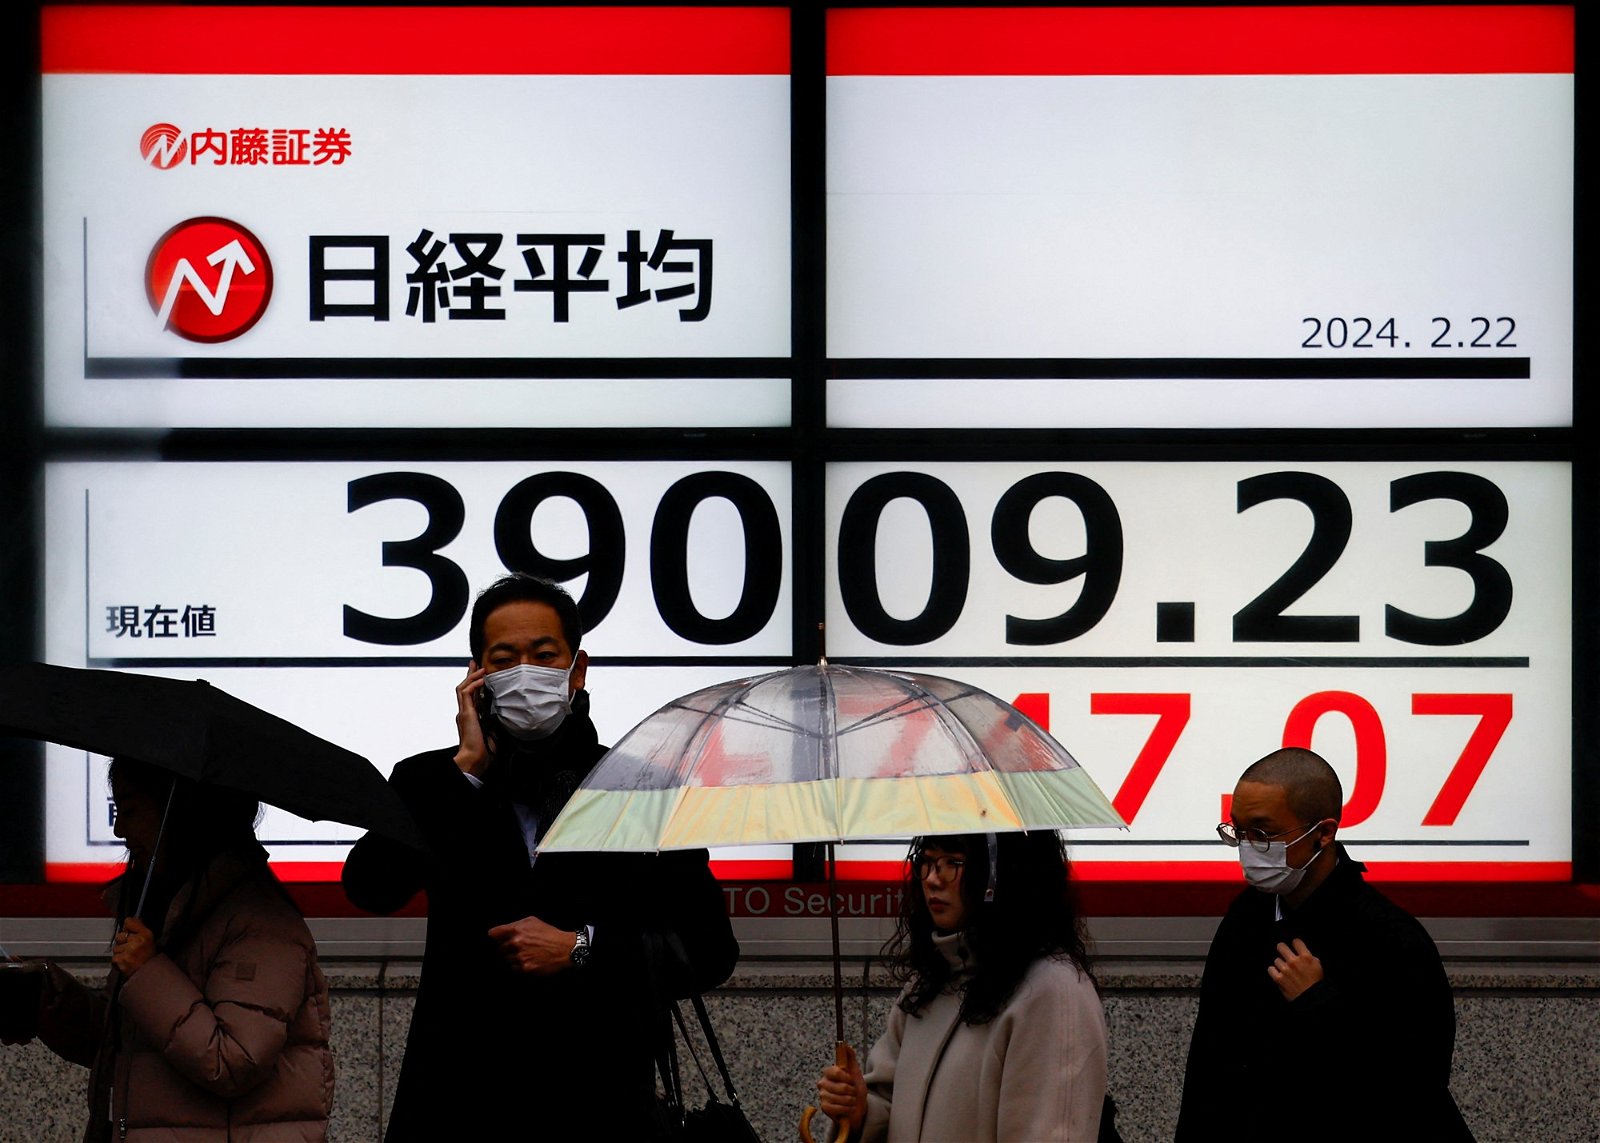 Tokyo's Nikkei passed 39,000 points for the first time in its history today